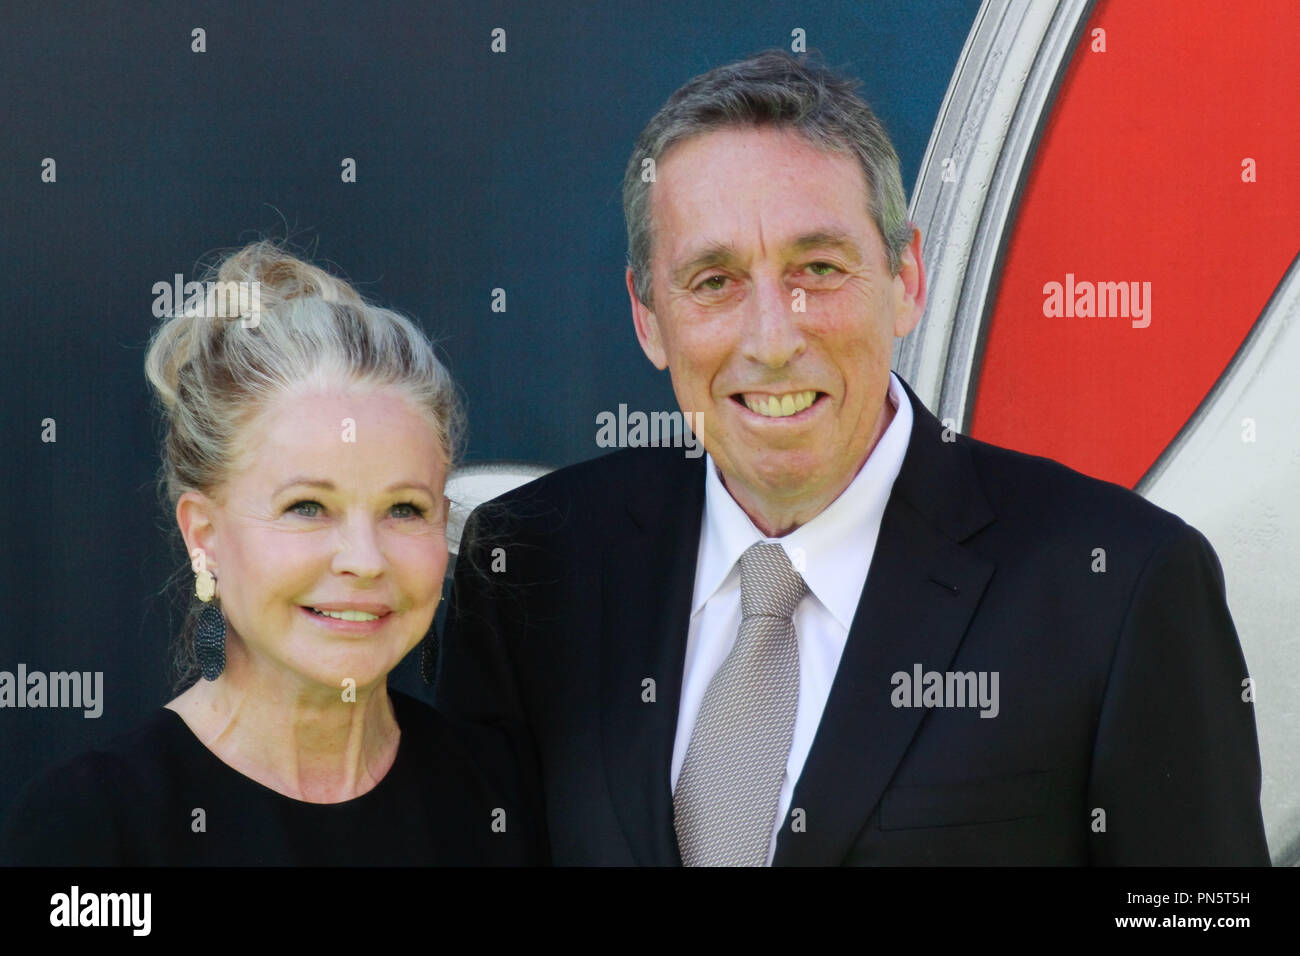 Genevieve Robert and Ivan Reitman at the Los Angeles Premiere of Columbia Pictures' 'Ghostbusters' held at TCL Chinese Theater in Hollywood, CA, July 9, 2016. Photo by Joe Martinez / PictureLux Stock Photo